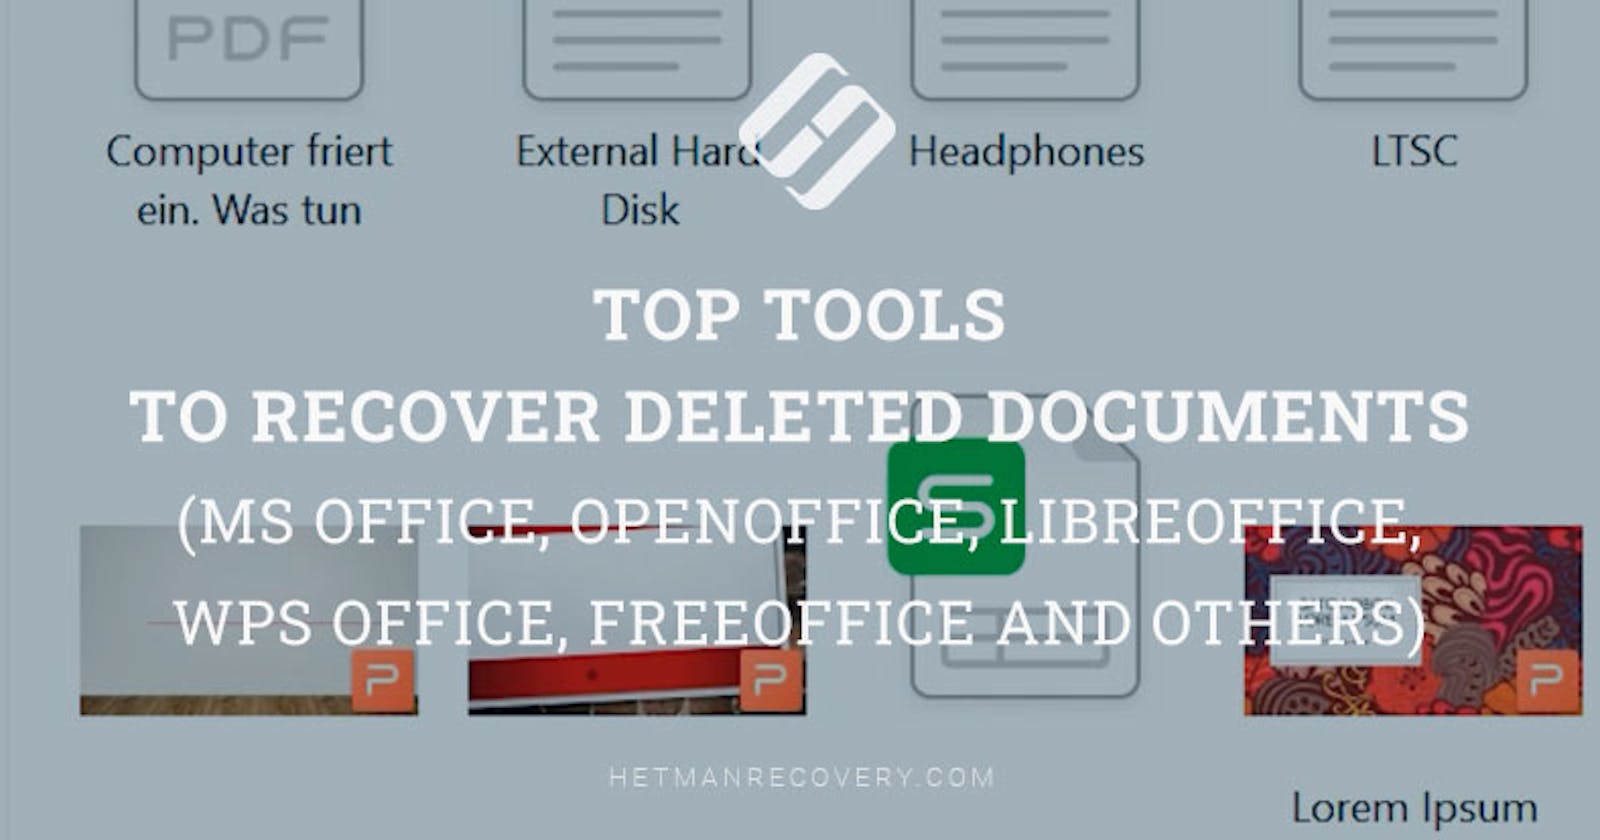 Top Tools to Recover Deleted Documents (MS Office, OpenOffice, LibreOffice, WPS Office, FreeOffice and Others)